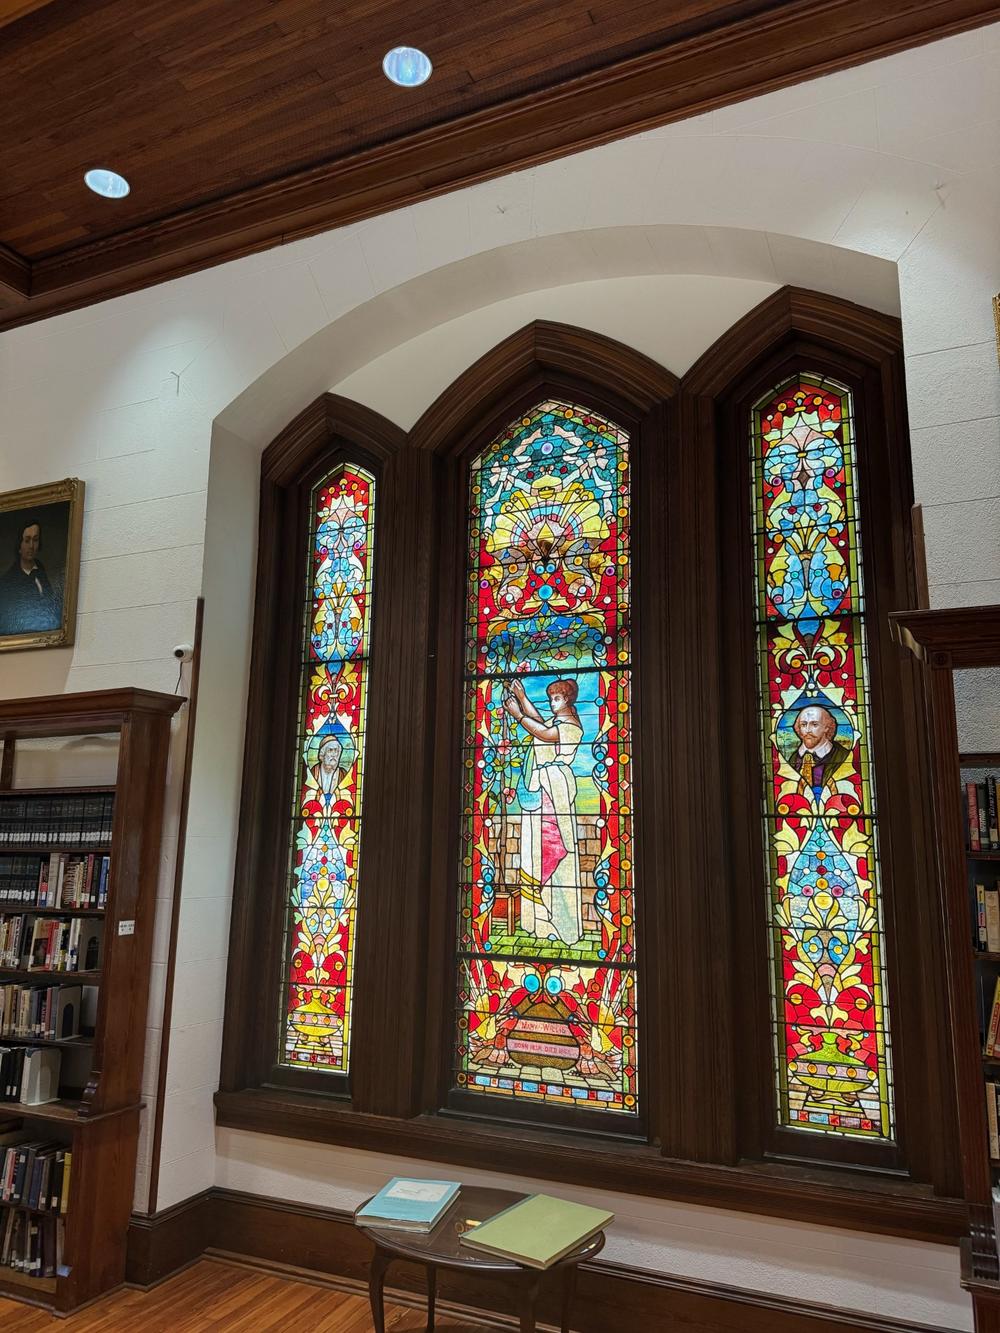 The Mary T. Willis Library is extraordinary. Its optic calling card: A Tiffany & Co. stained glass depiction of Mary Willis, 